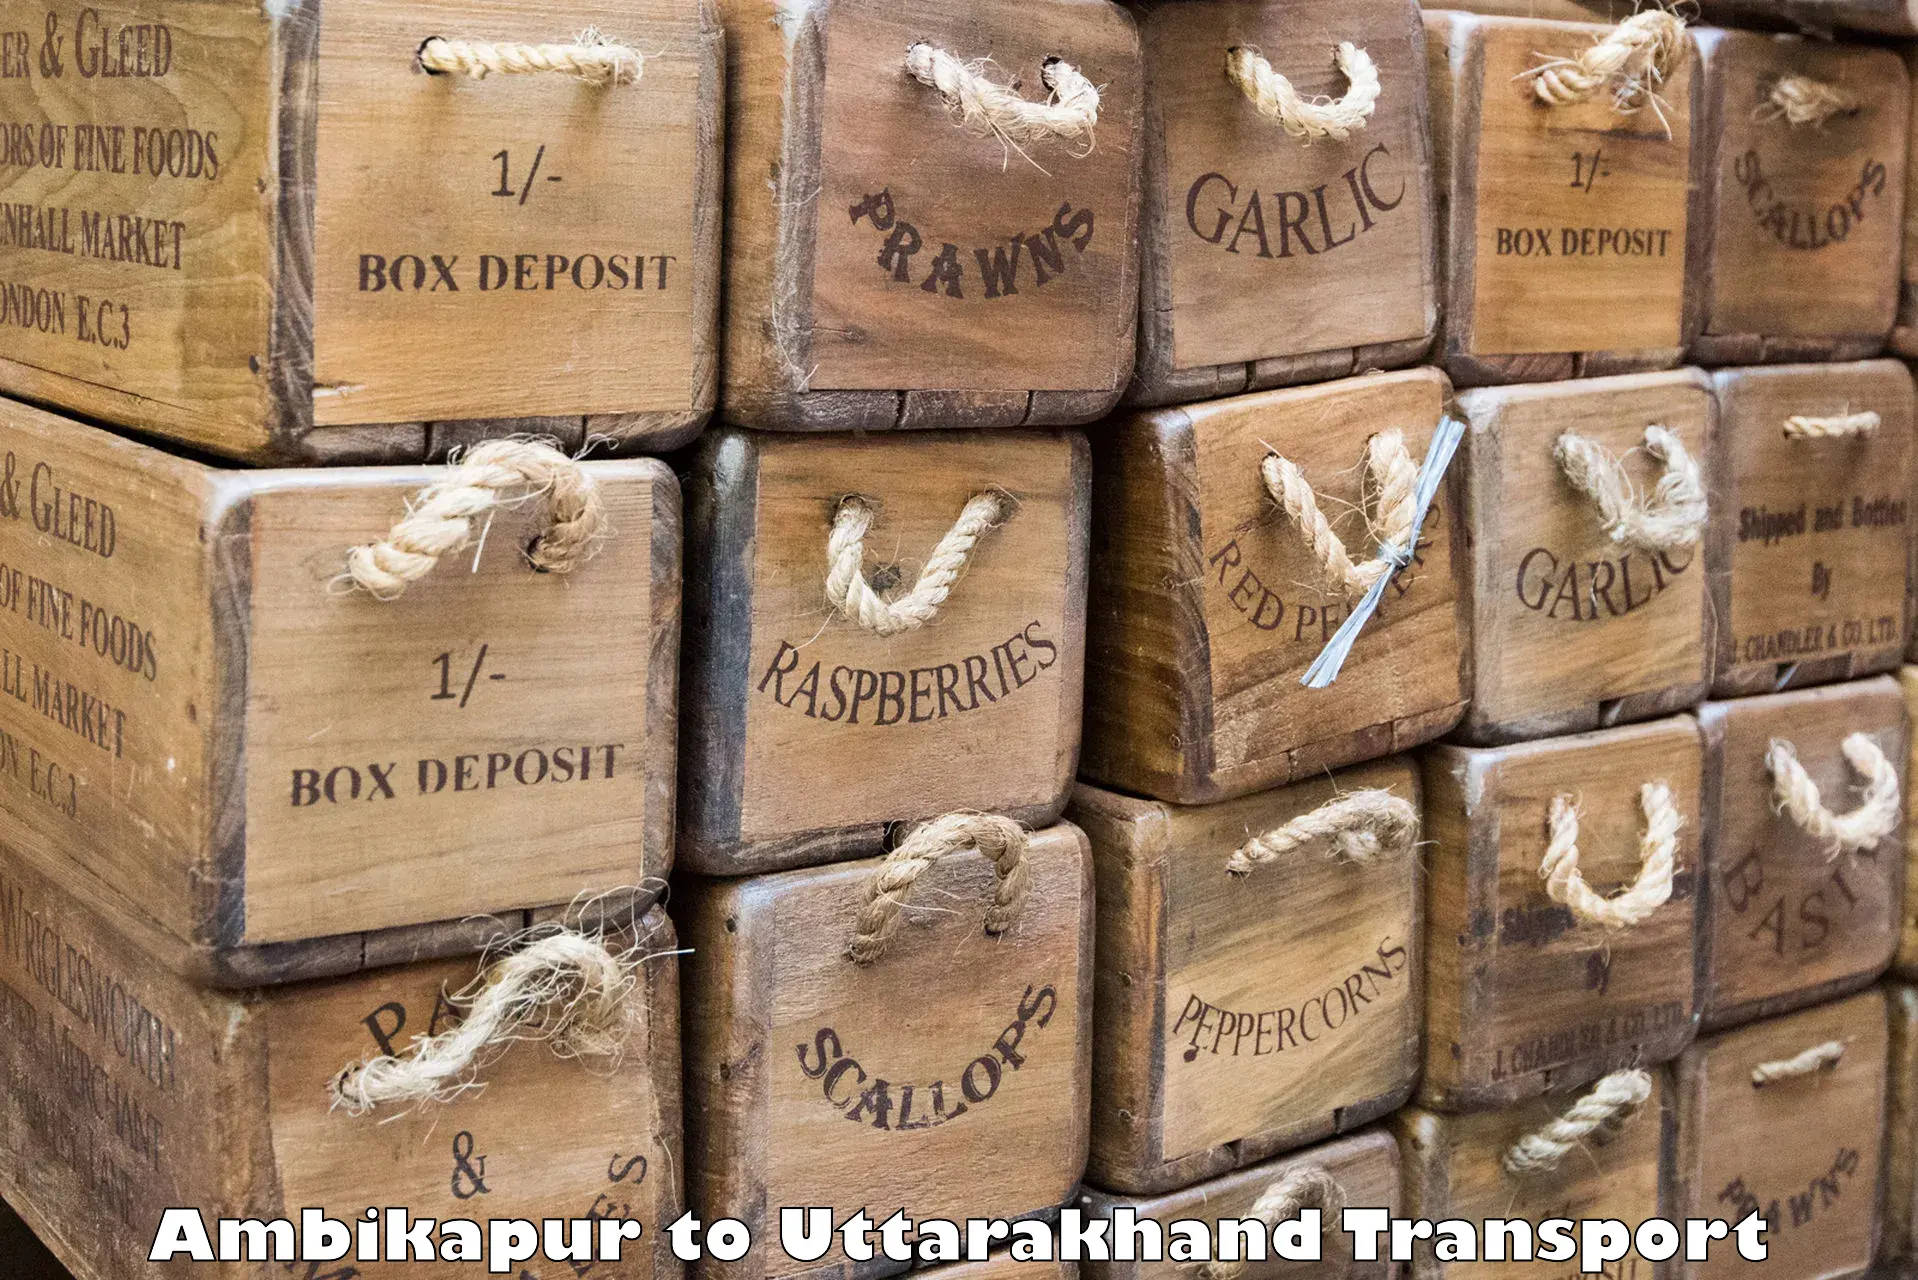 Air freight transport services Ambikapur to Haridwar